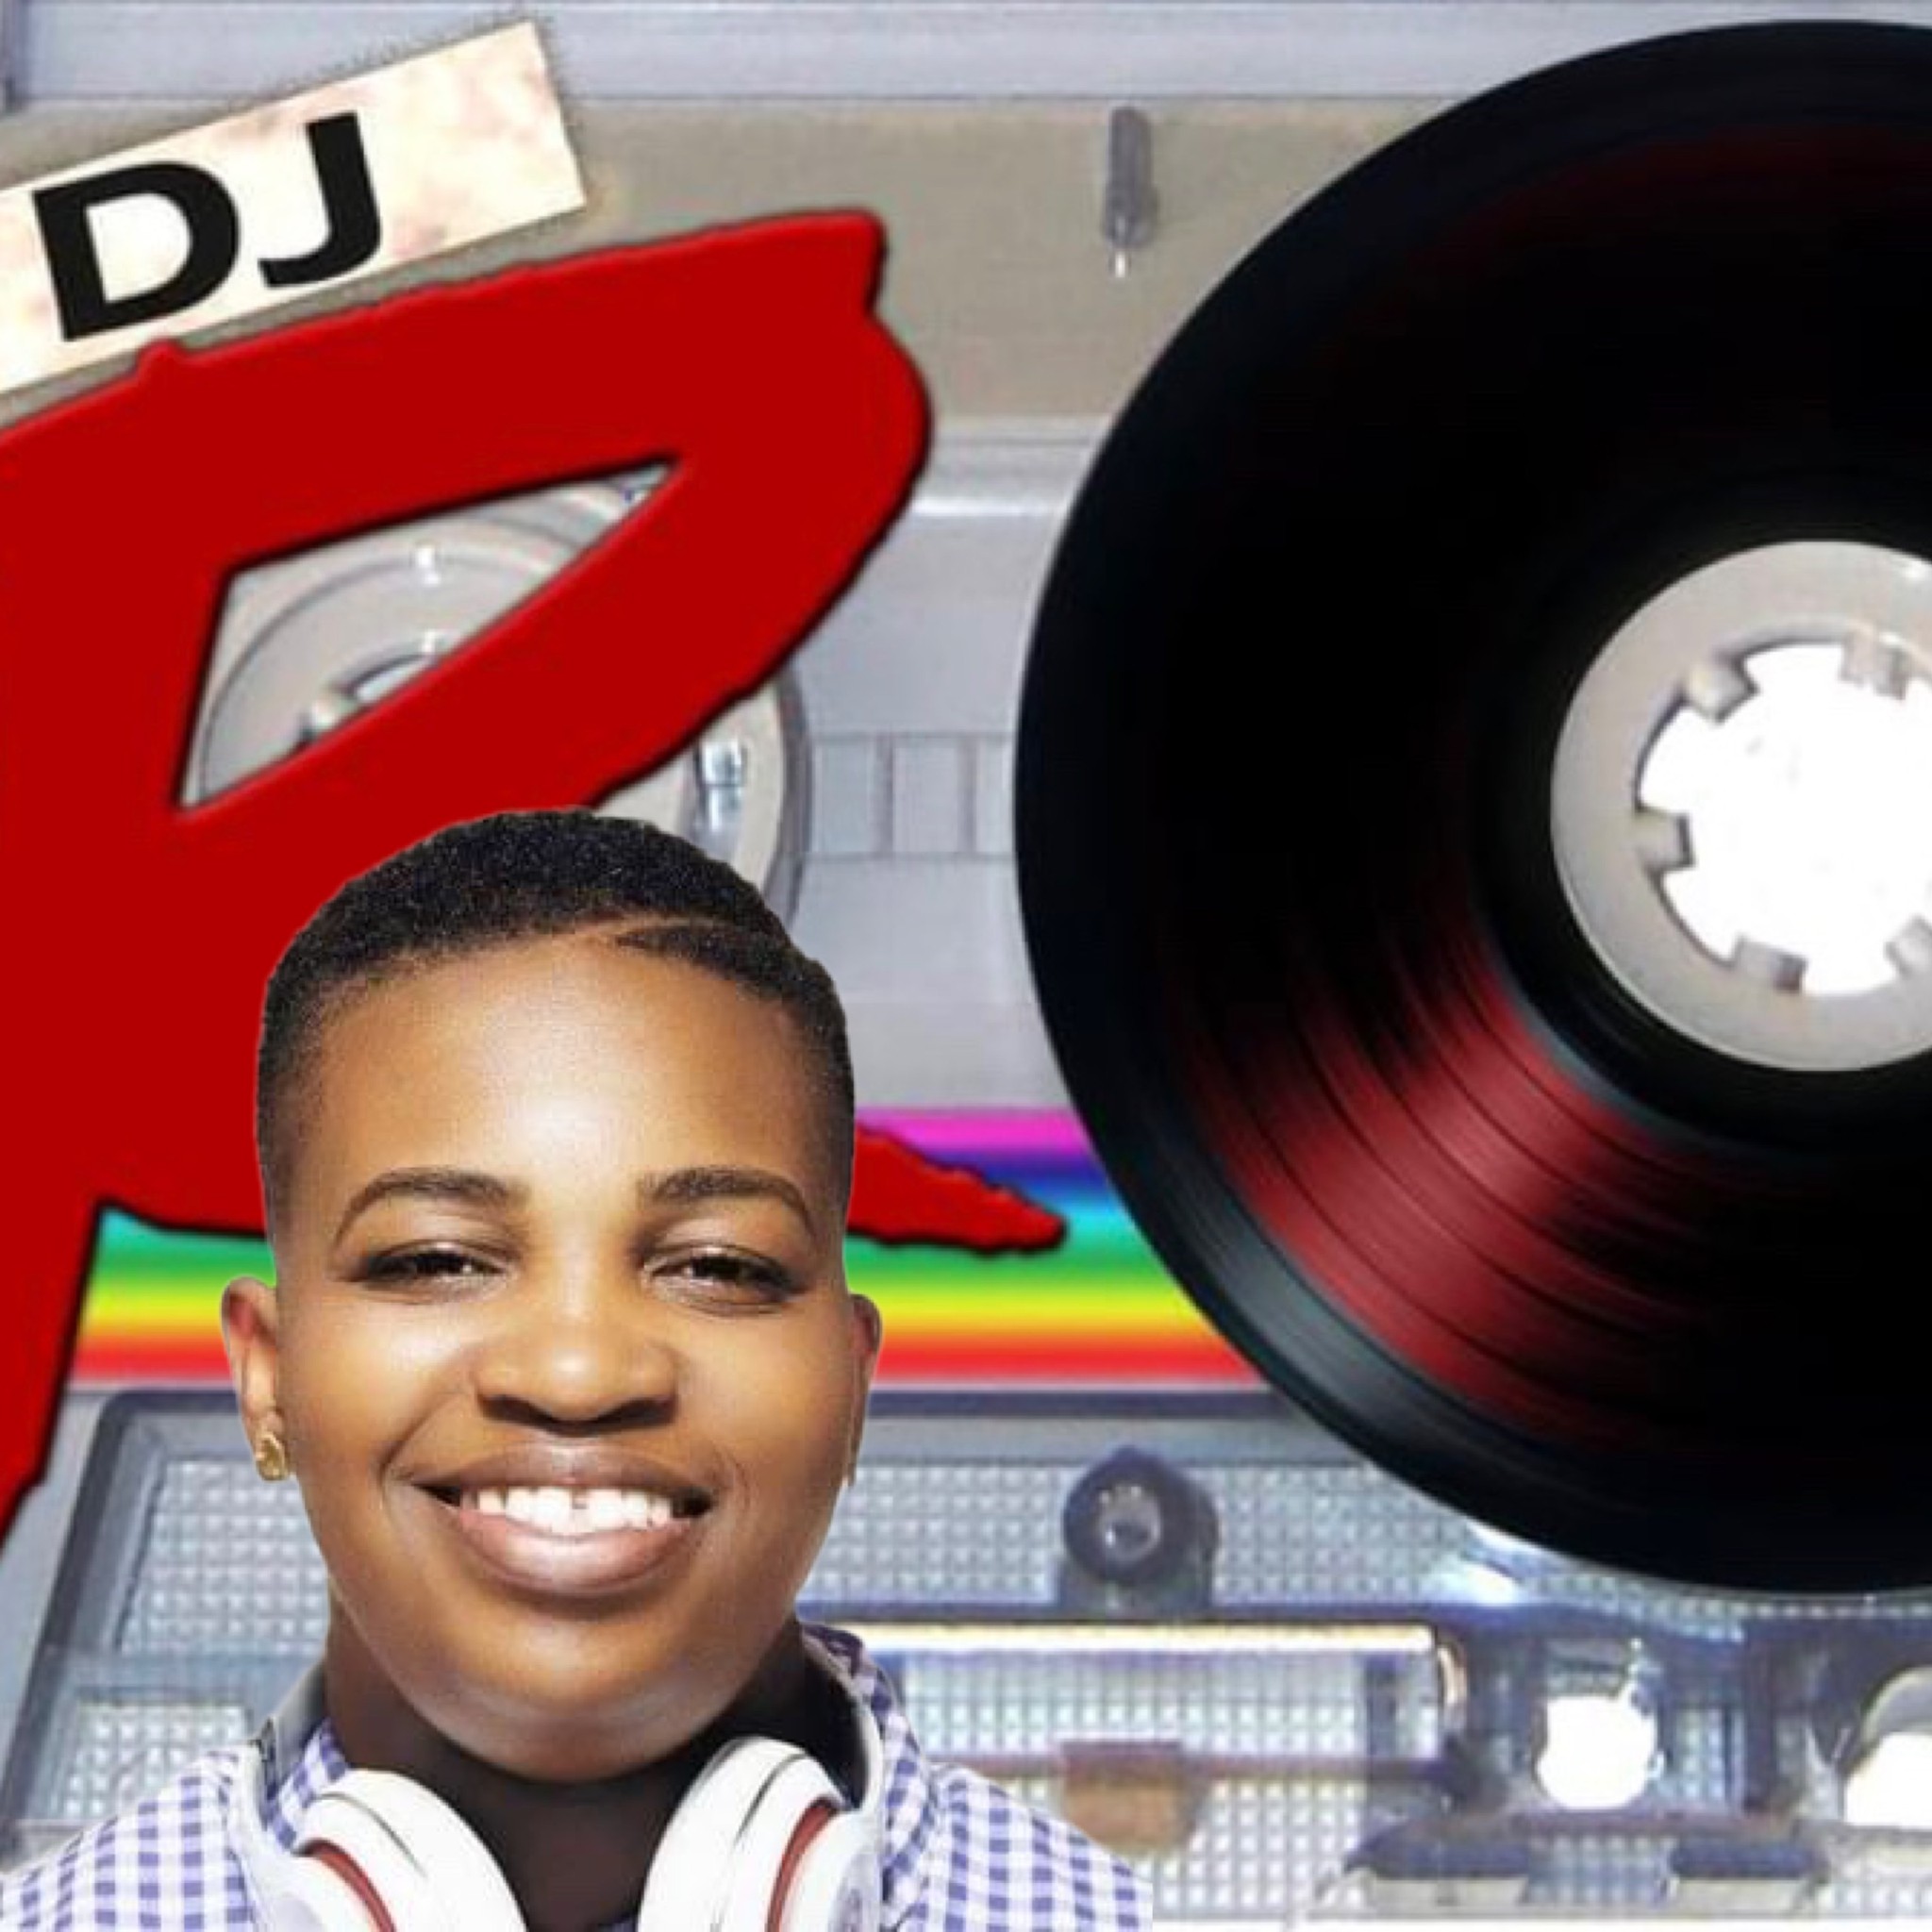 Dj Ro with large cassette tabe reel in background